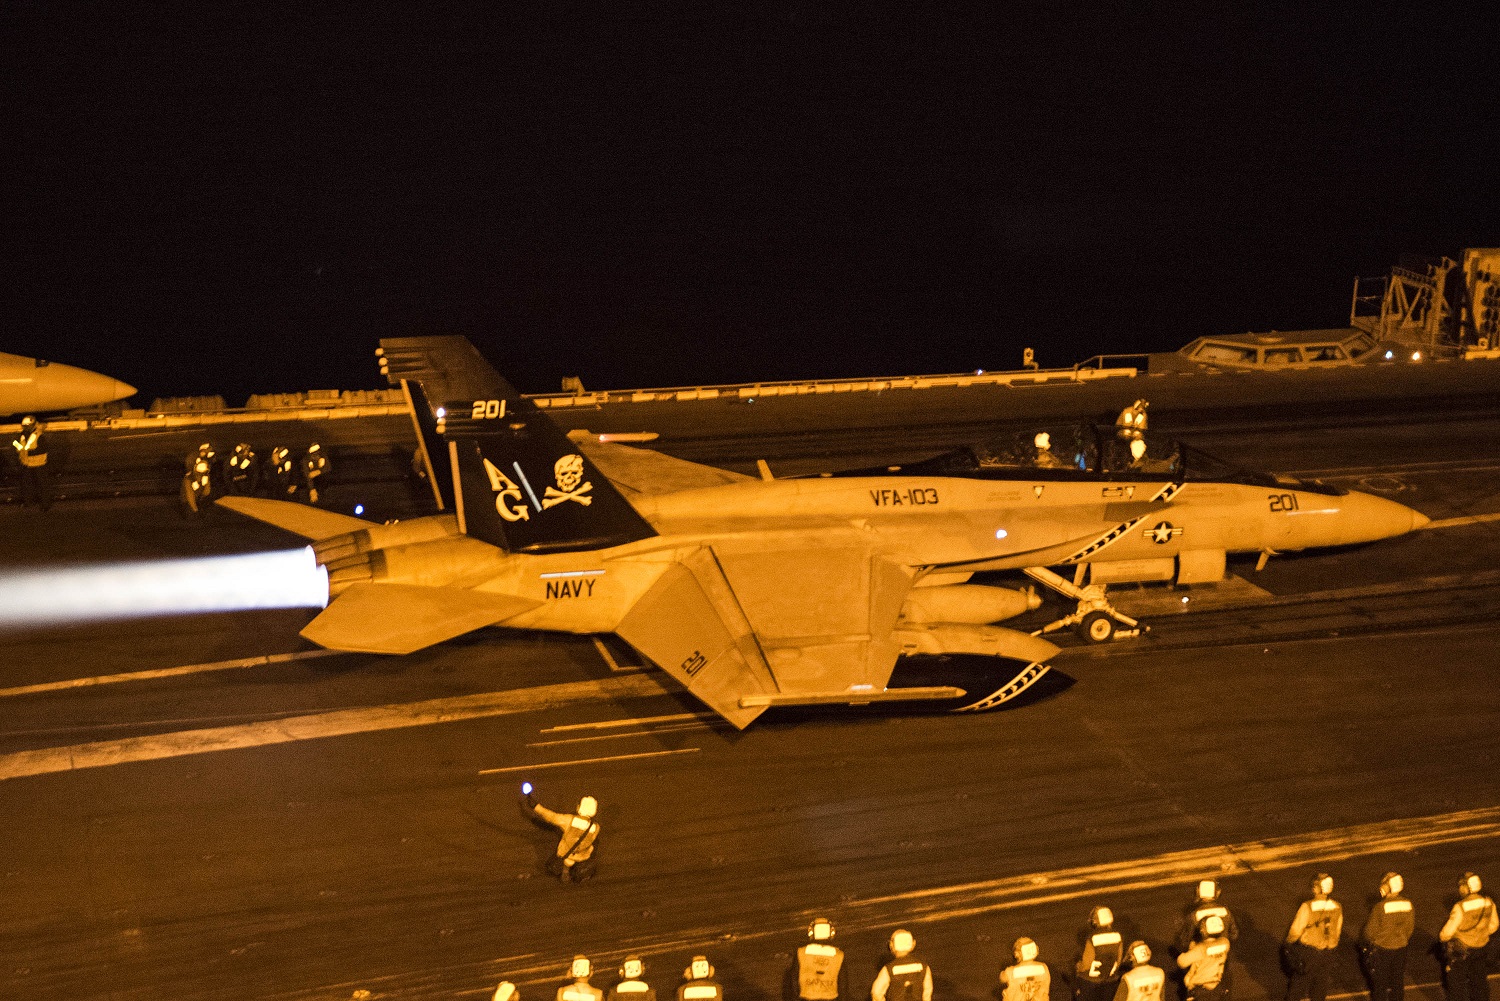 151228-N-DZ642-012 
ARABIAN GULF (Dec. 28, 2015) An of Strike Fighter Squadron (VFA) 103, launches from the flight deck of the aircraft carrier USS Harry S. Truman (CVN 75). The Harry S. Truman Carrier Strike Group is deployed in support of maritime security operations and theater security cooperation efforts in the U.S. 5th Fleet area of responsibility. (U.S. Navy photo by Mass Communication Specialist 3rd Class B. Siens/Released)